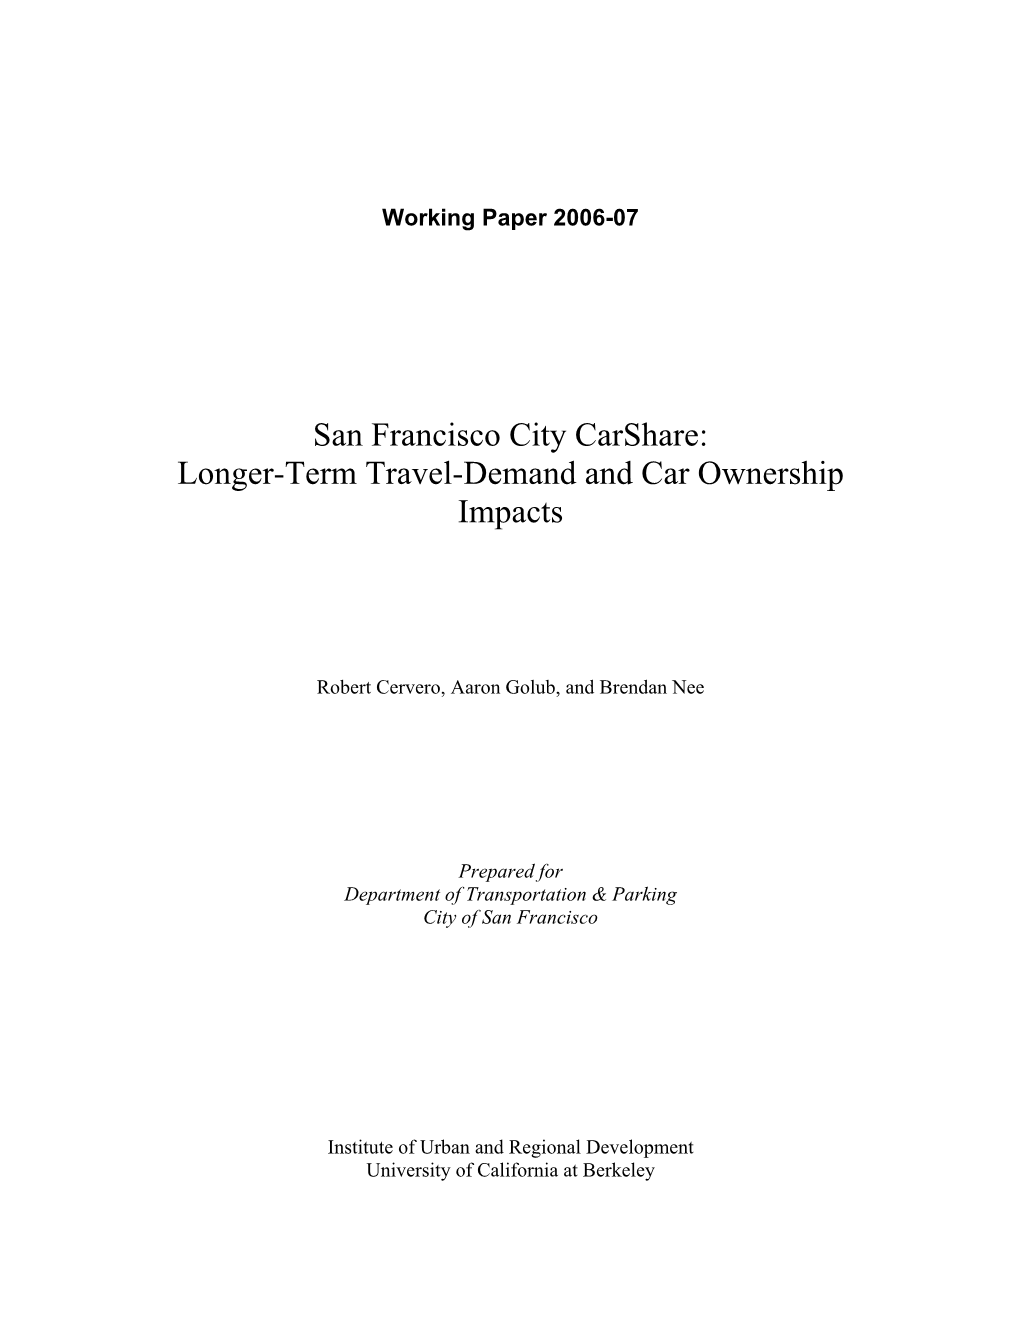 Longer-Term Travel-Demand and Car Ownership Impacts